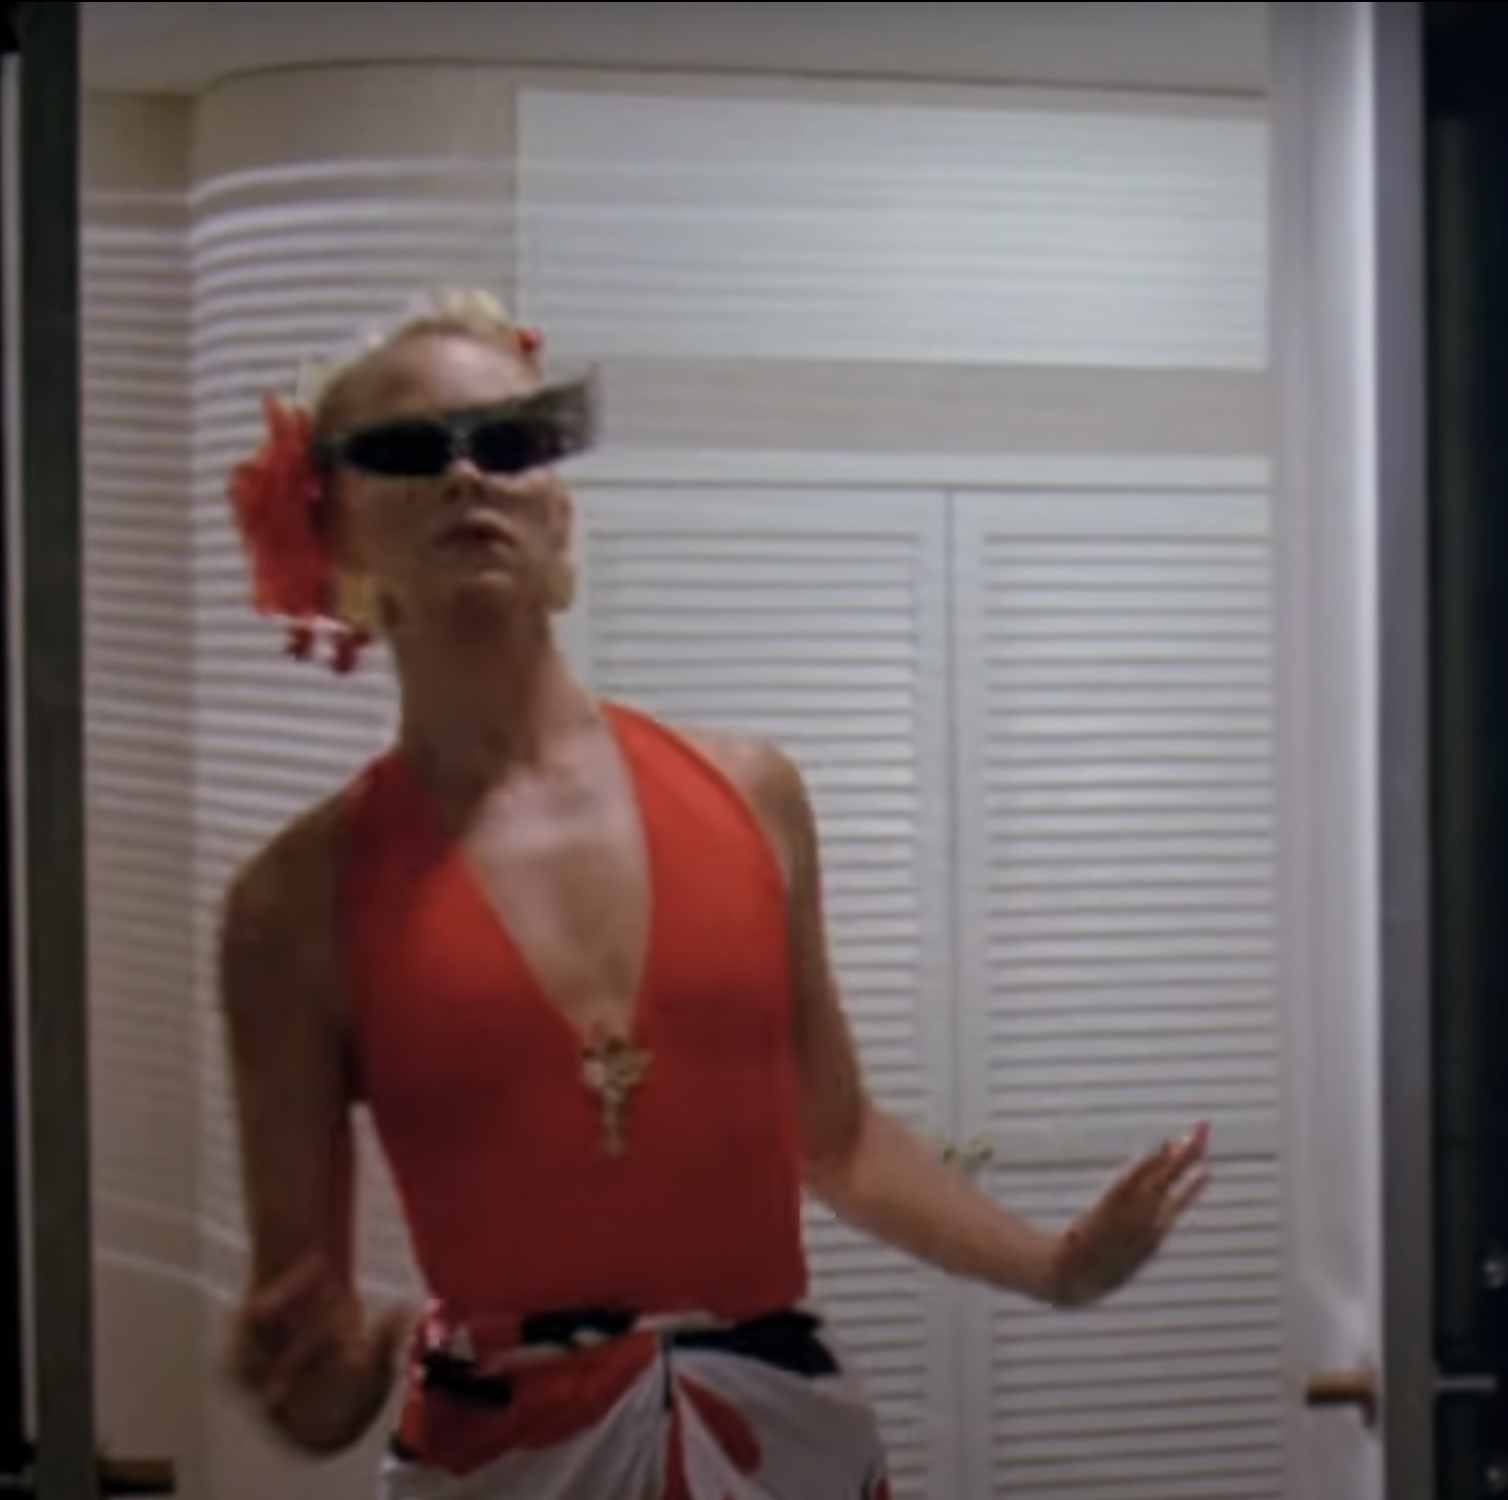 Goldie Hawn in "Overboard" im Jahr 1987 | Quelle: Youtube.com/Rotten Tomatoes Classic Trailers